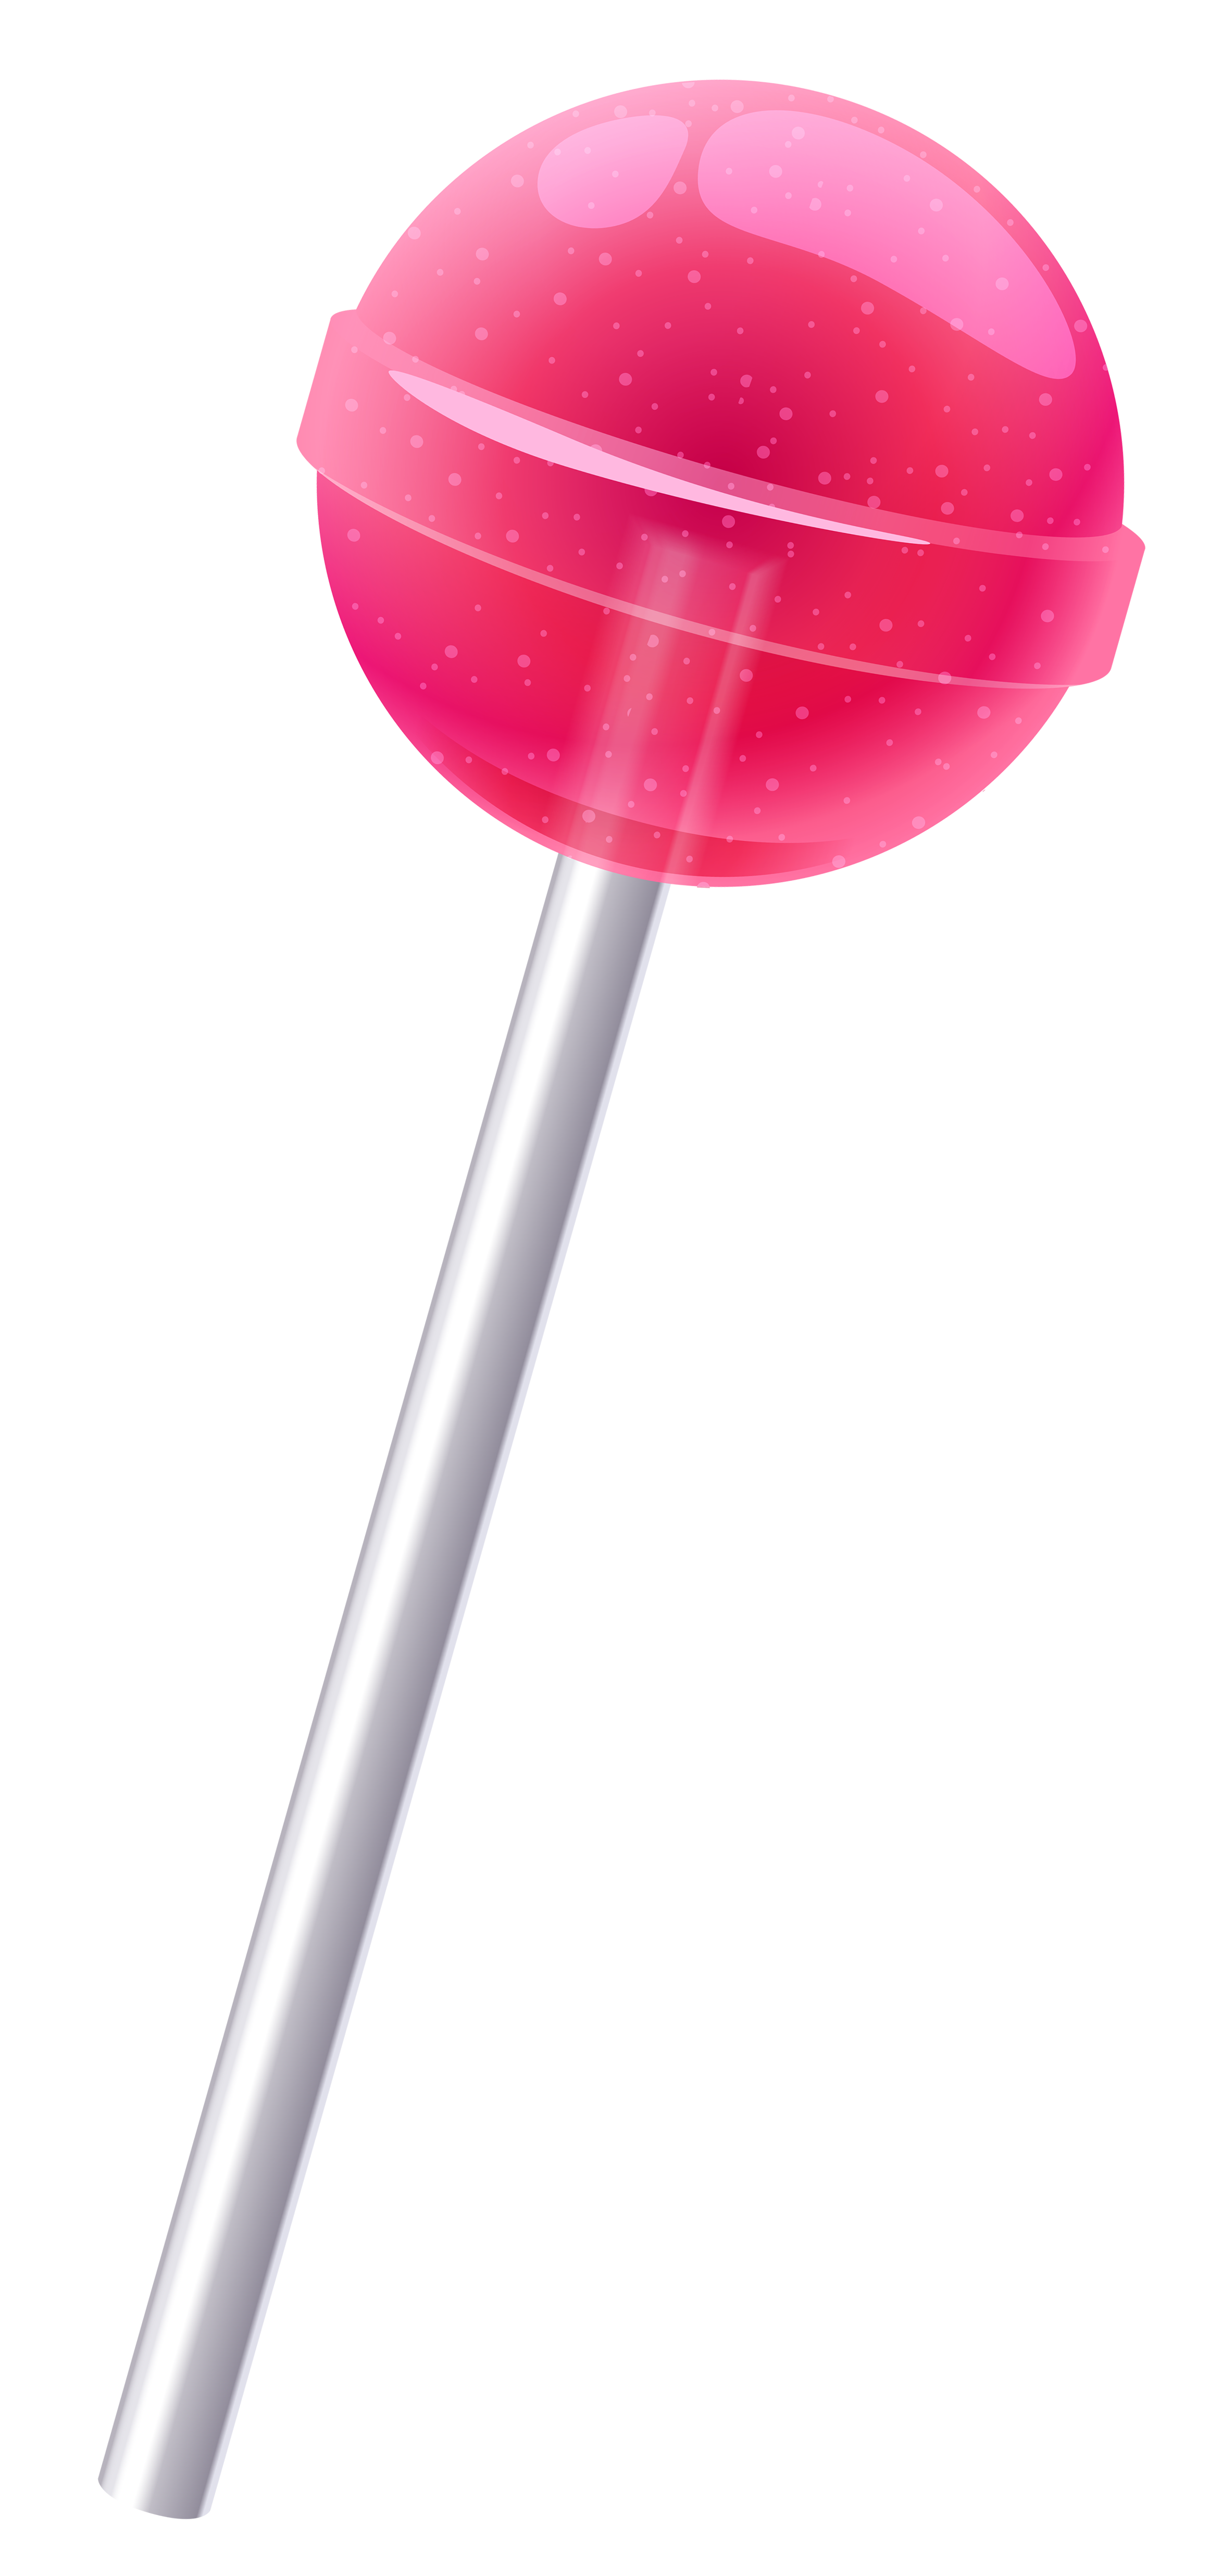 Pink png picture gallery. Lollipop clipart lolipop